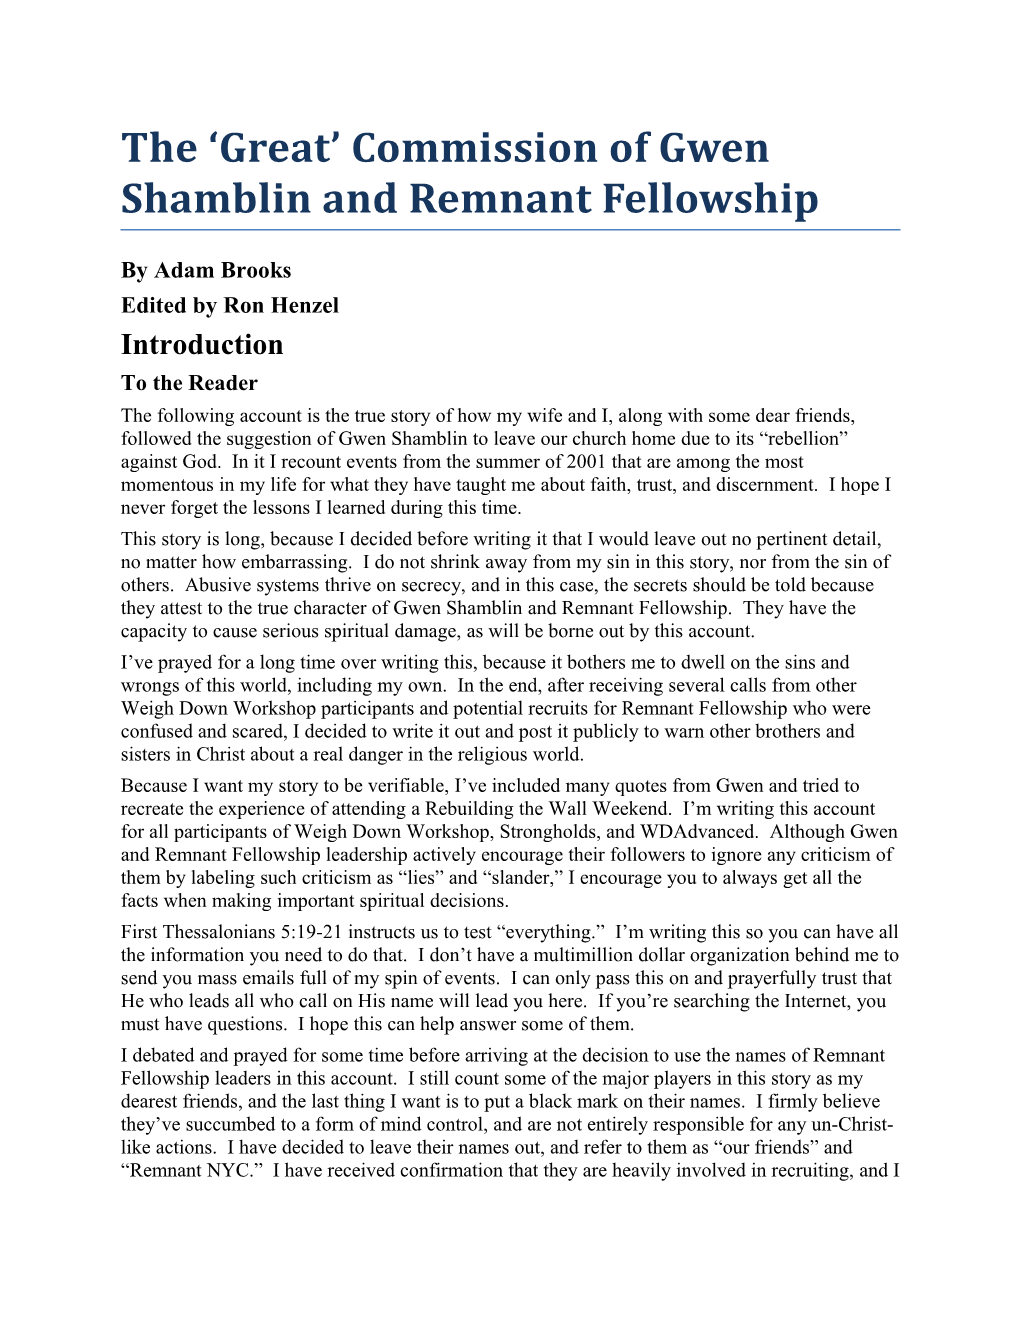 The Great Commission of Gwen Shamblin and Remnant Fellowship